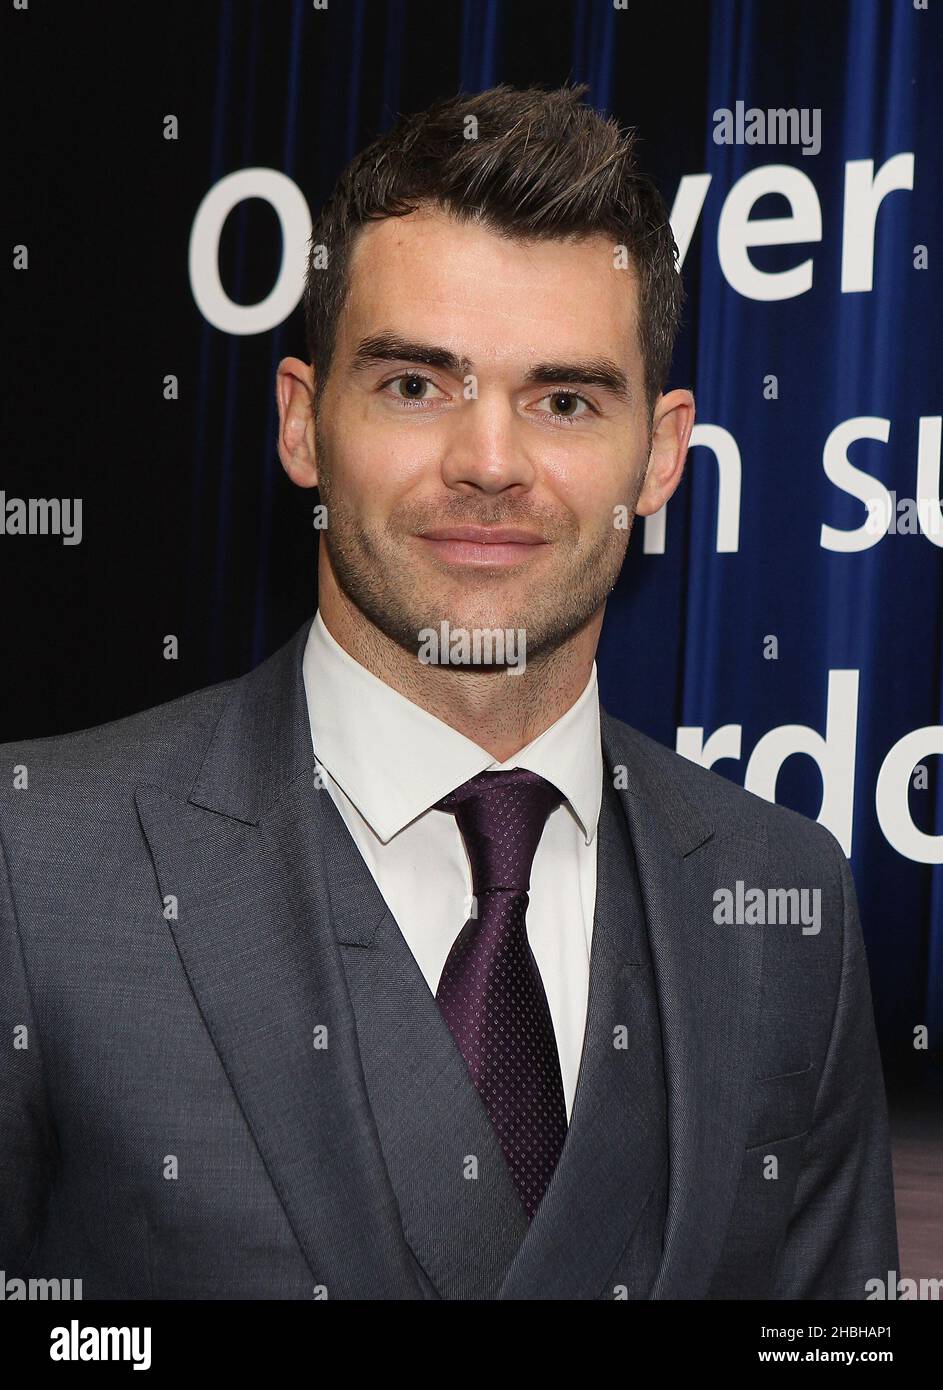 Jimmy Anderson Cricketer attending the Nordoff Robbins Silver Clef Awards at the Hilton Hotel in London. Stock Photo